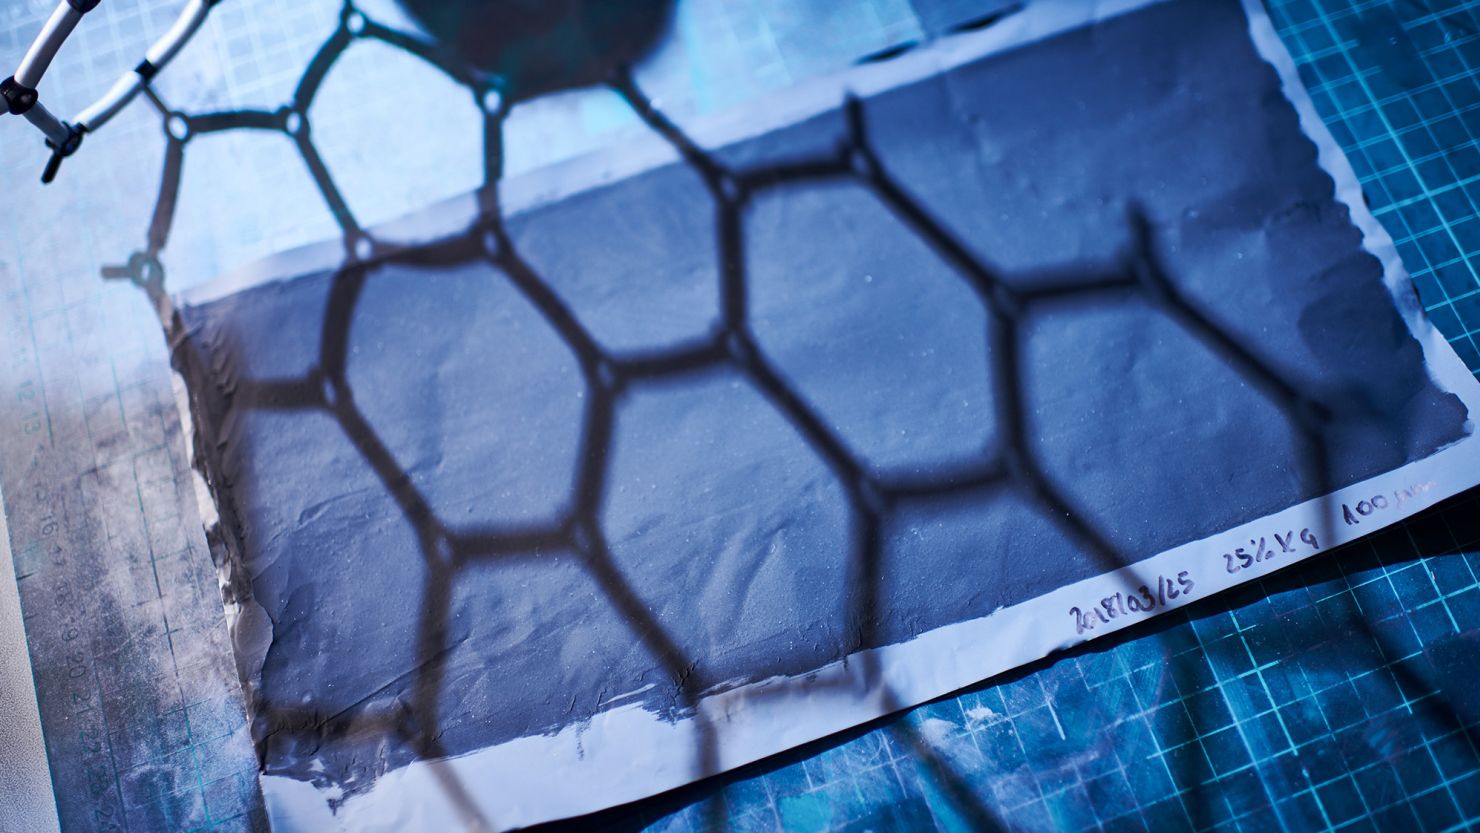 A model showing the hexagonal structure of graphene cast a shadow on graphene ink coated onto metal foil for the construction of battery & supercapacitor electrodes in a laboratory at the National Graphene Institute facility, part of the The University of Manchester, in Manchester, U.K., on Thursday, April 12, 2018. Researchers are studying ways to use graphene in batteries, and the material has the potential to significantly boost performance in a much-needed technology. Photographer: Matthew Lloyd/Bloomberg via Getty Images